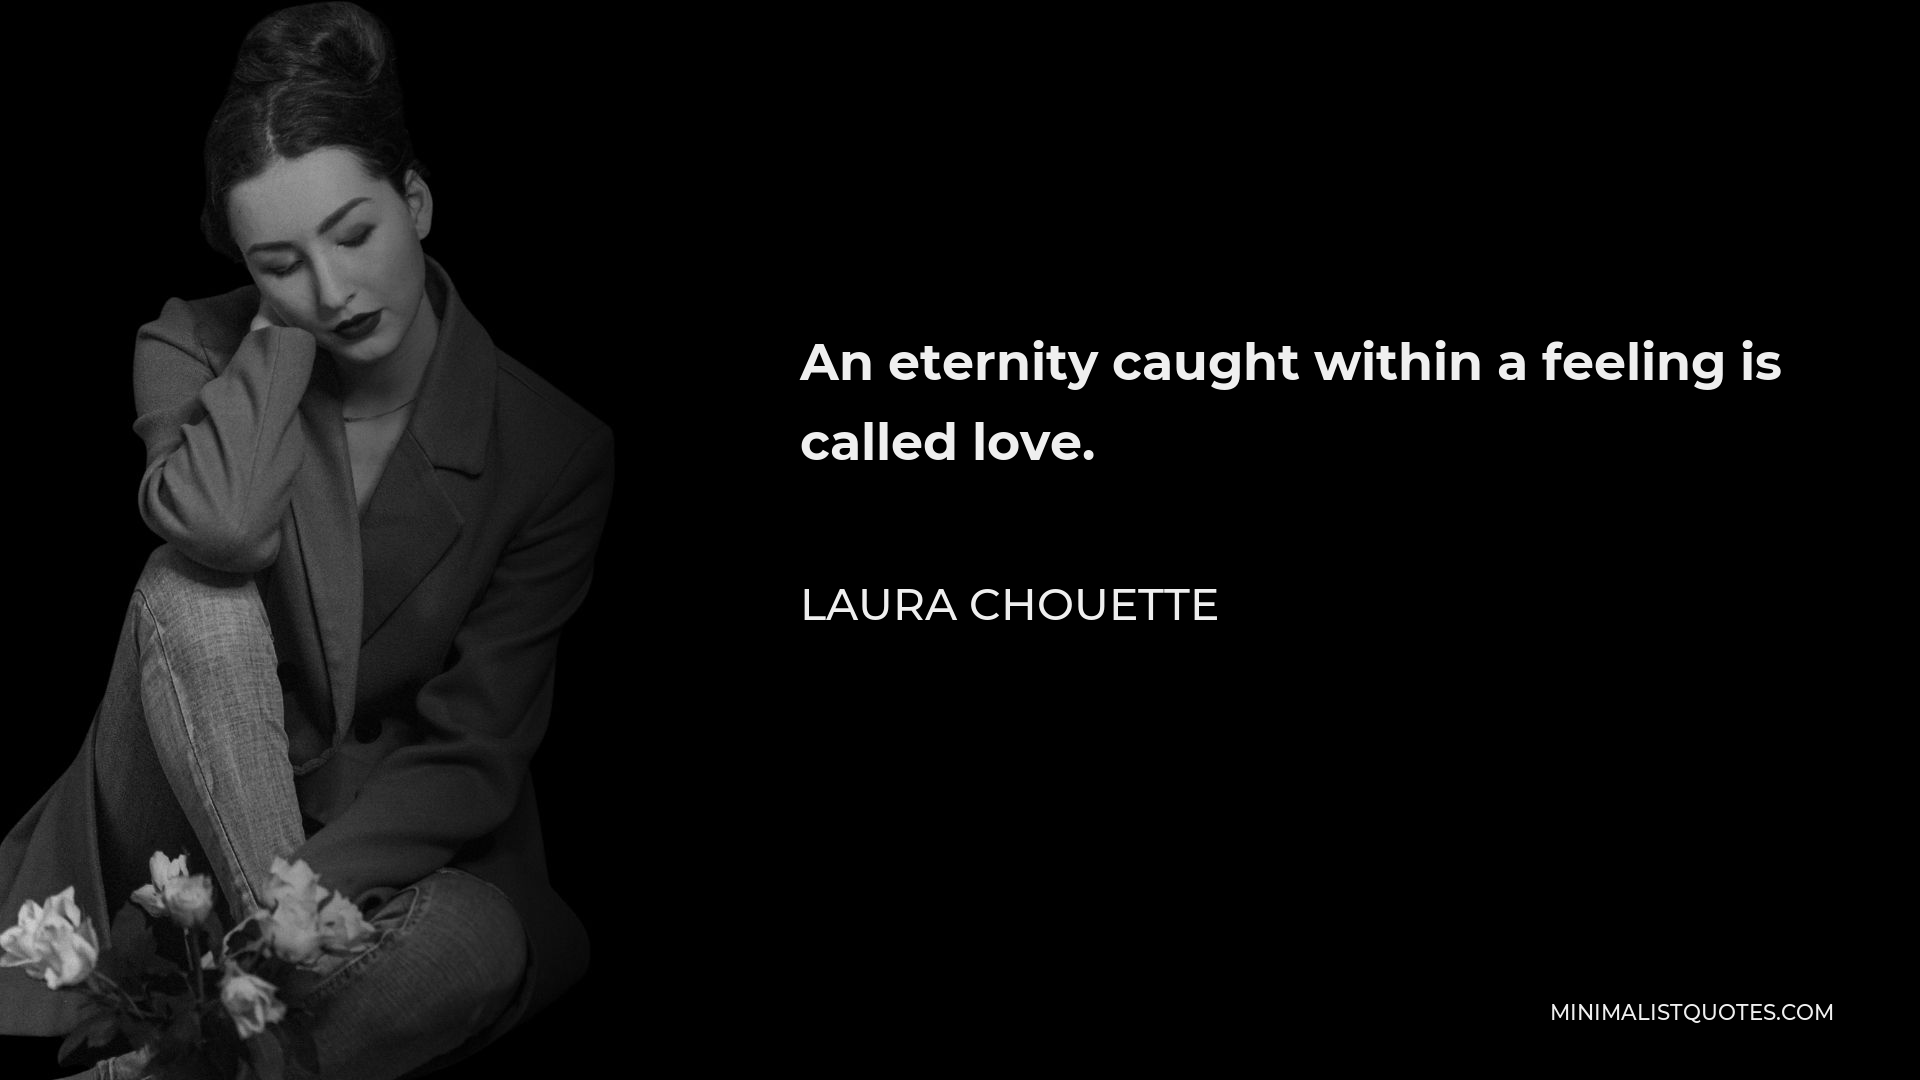 Laura Chouette Quote - An eternity caught within a feeling is called love.